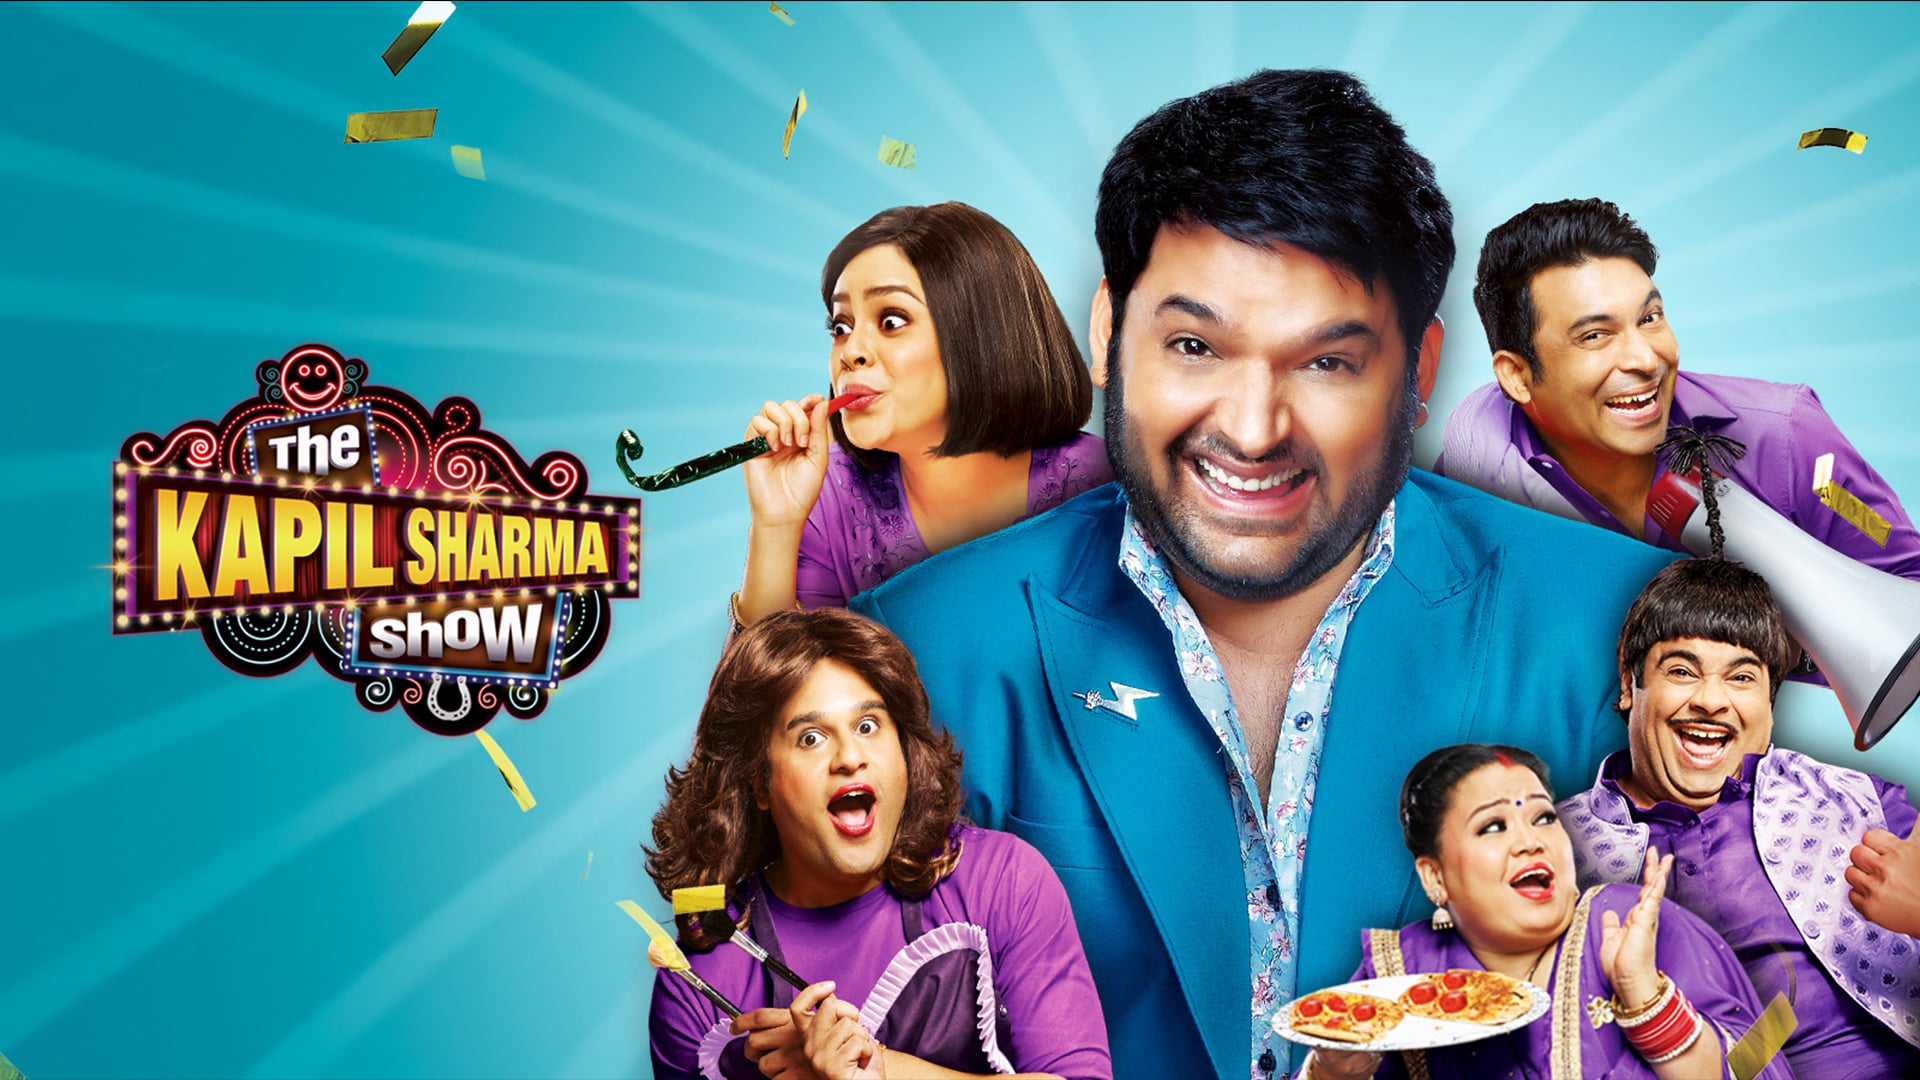 The Kapil Sharma Show - Season 2 Episode 86 : The Cast Of Made In China